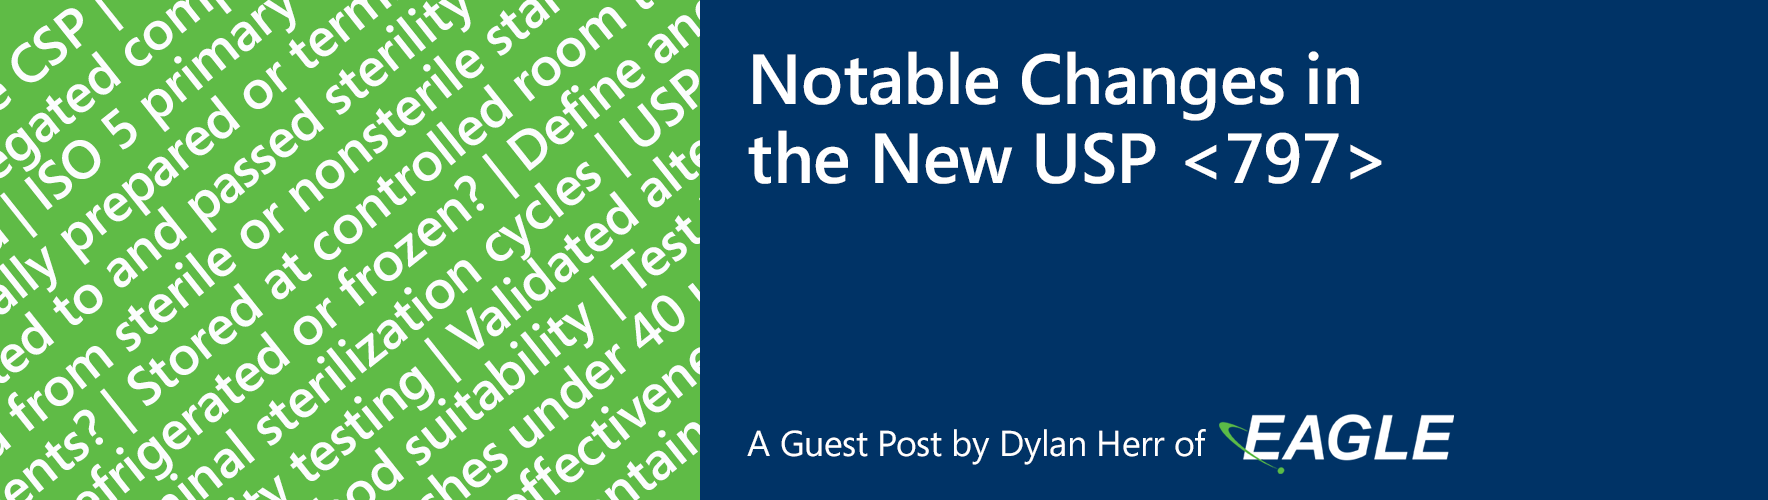 noteable_changes_in_the_new_usp_797.png.